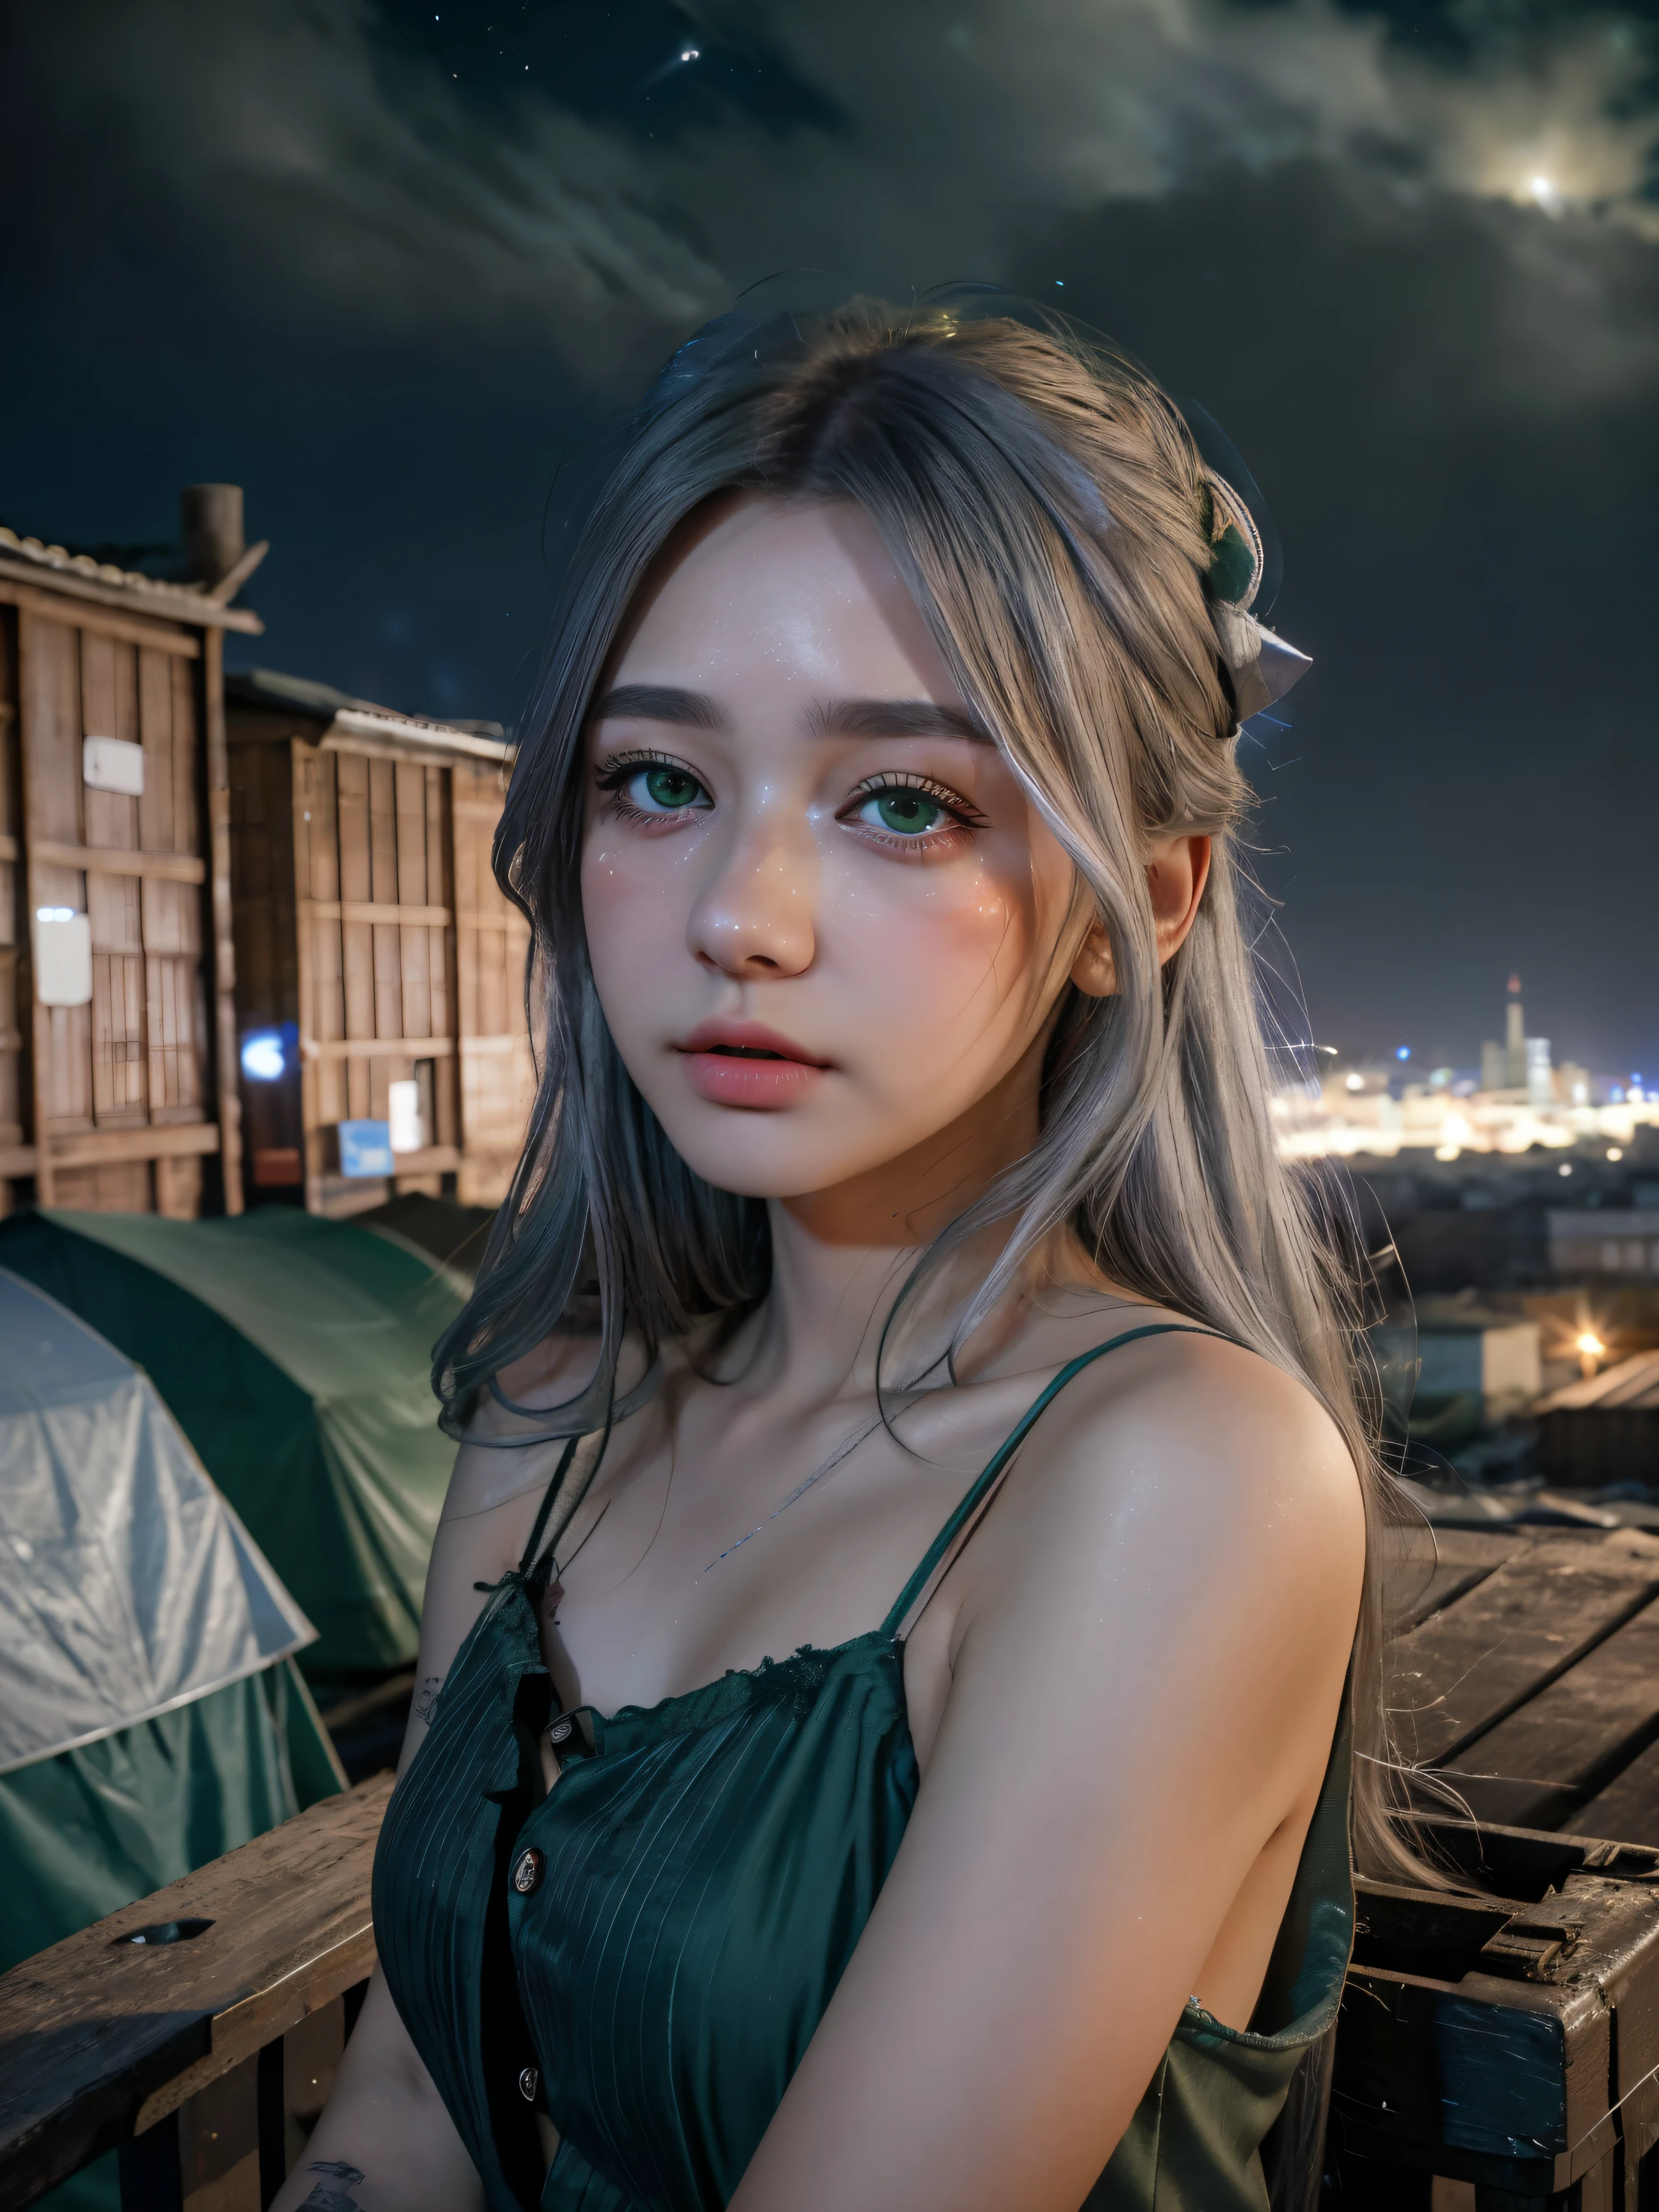 (4k), (highest quality), (best details)A shantytown at night with lots of falling stars、silver hair、green eyes、tattoo、torn dress、dirty face、despair、A beautiful gloomy French maiden looks up at the sky、